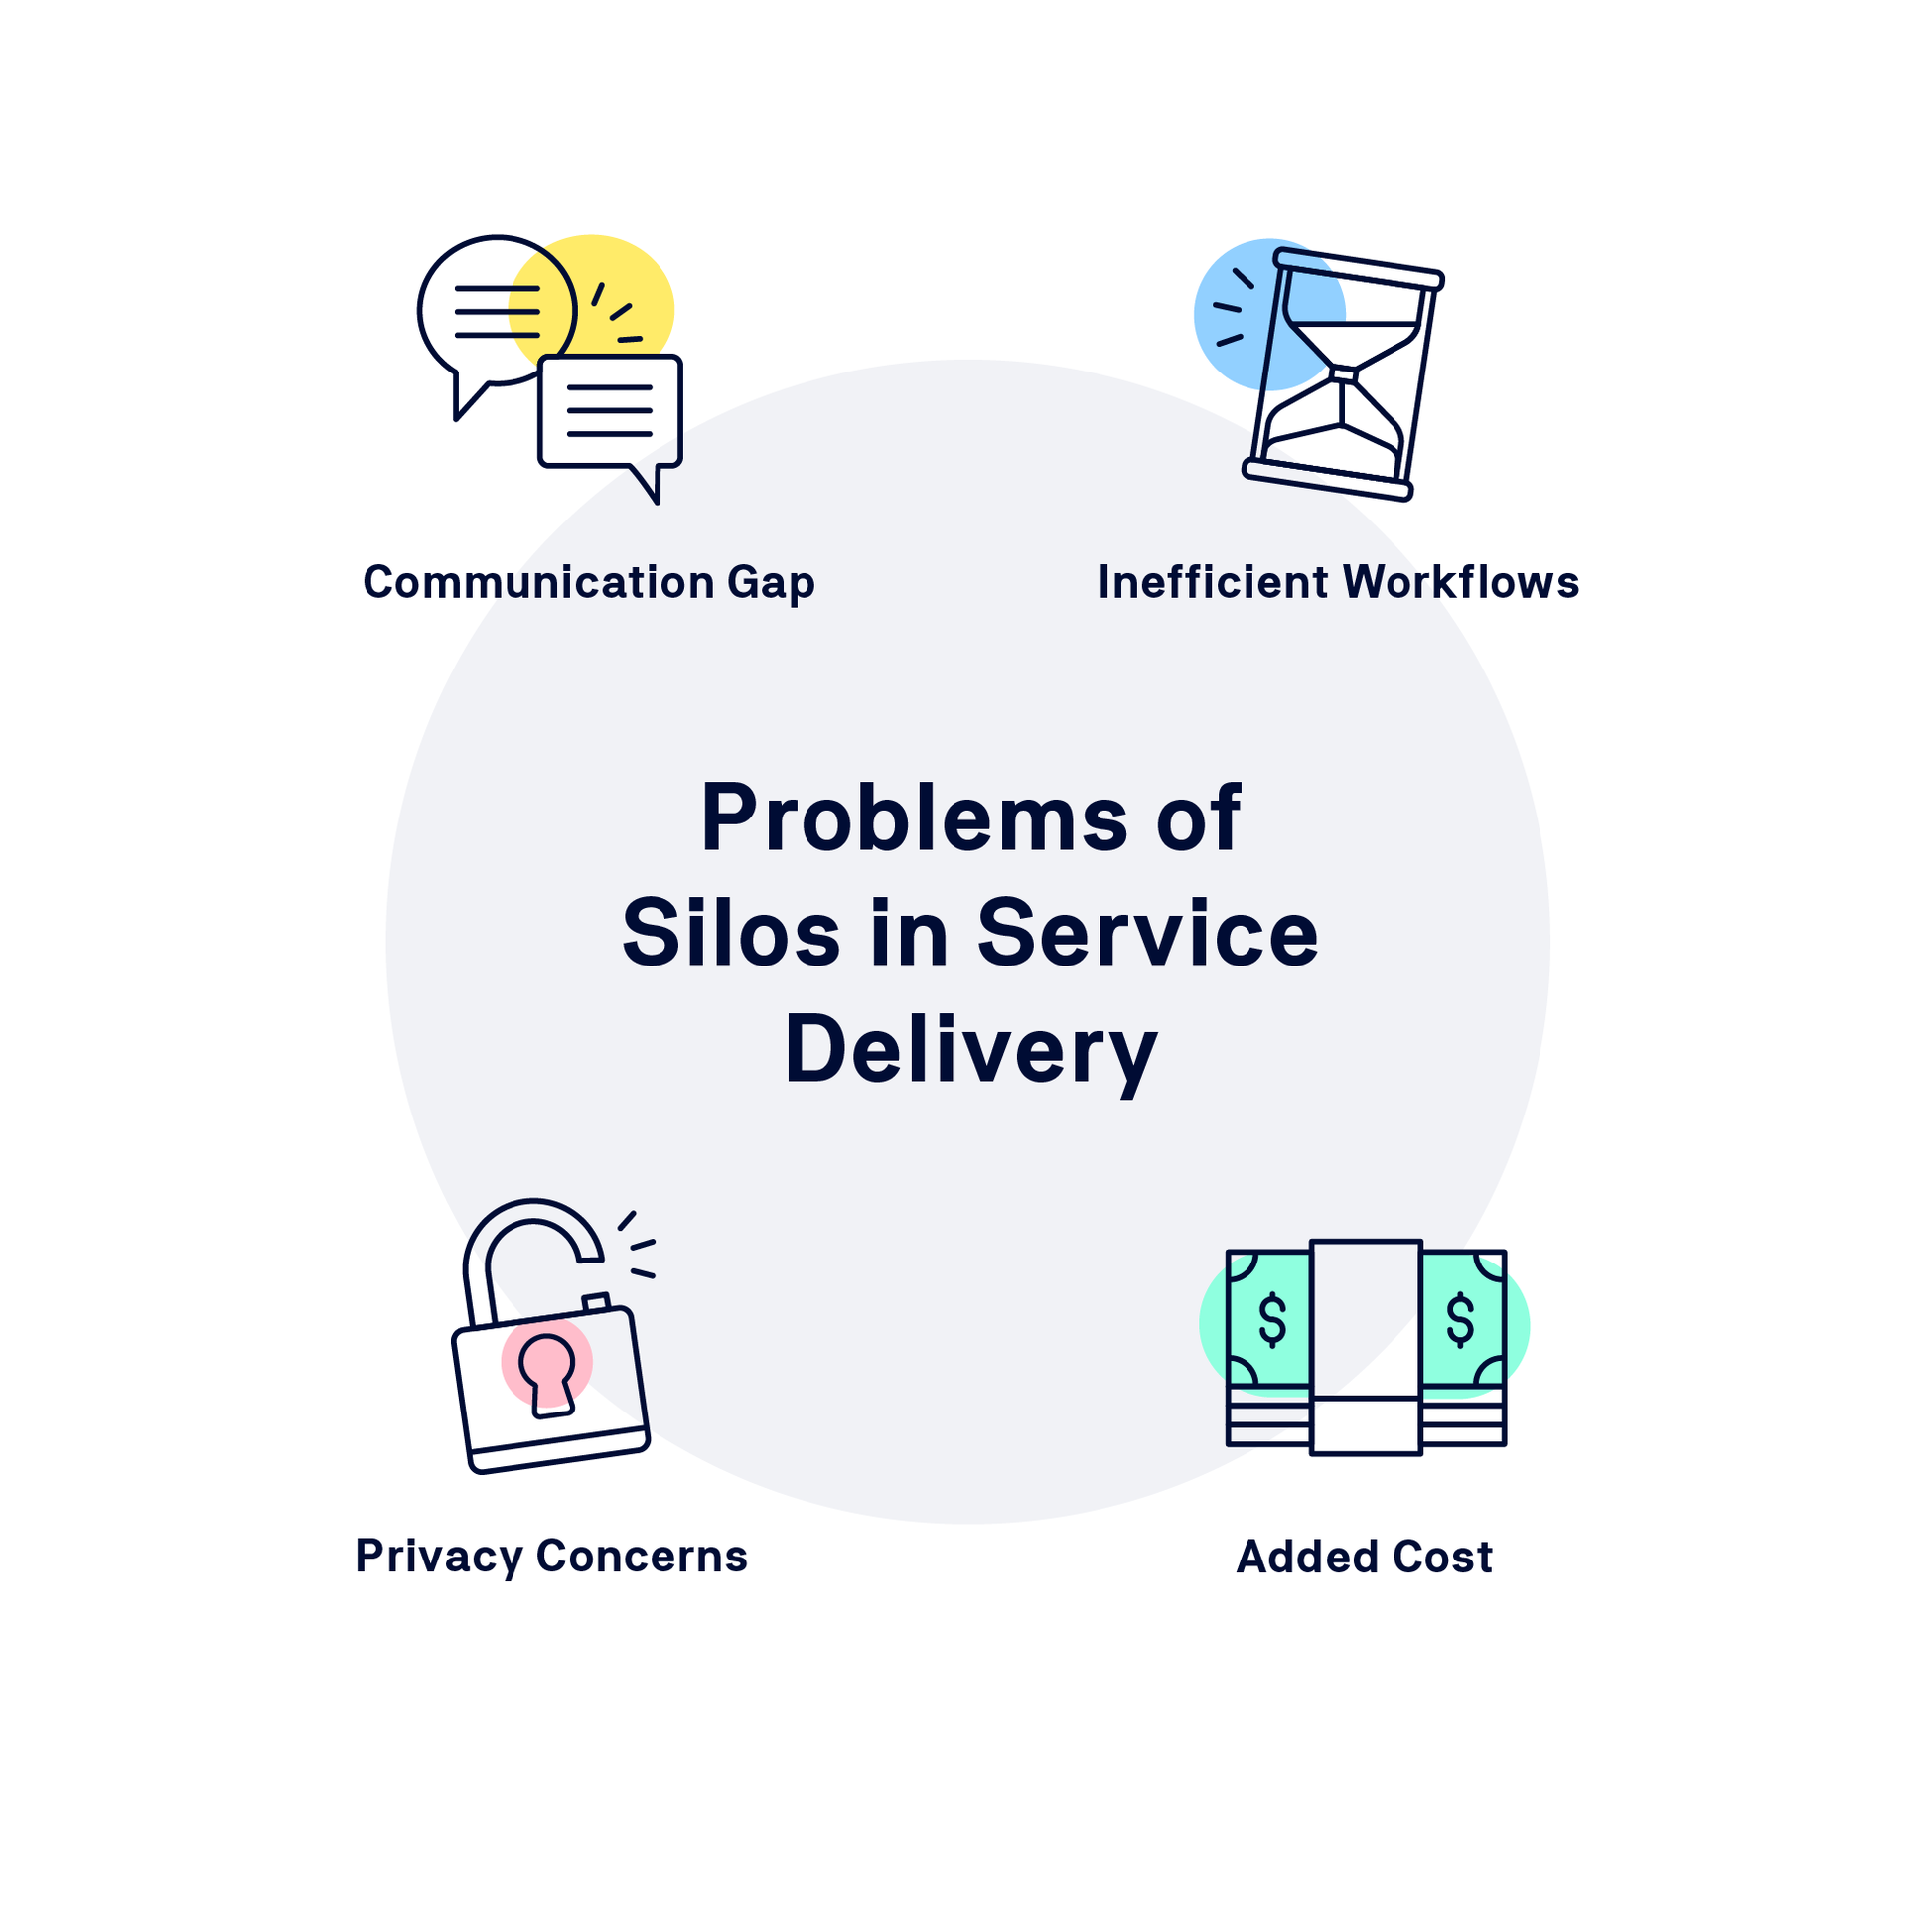 Problems caused by silos in customer service delivery